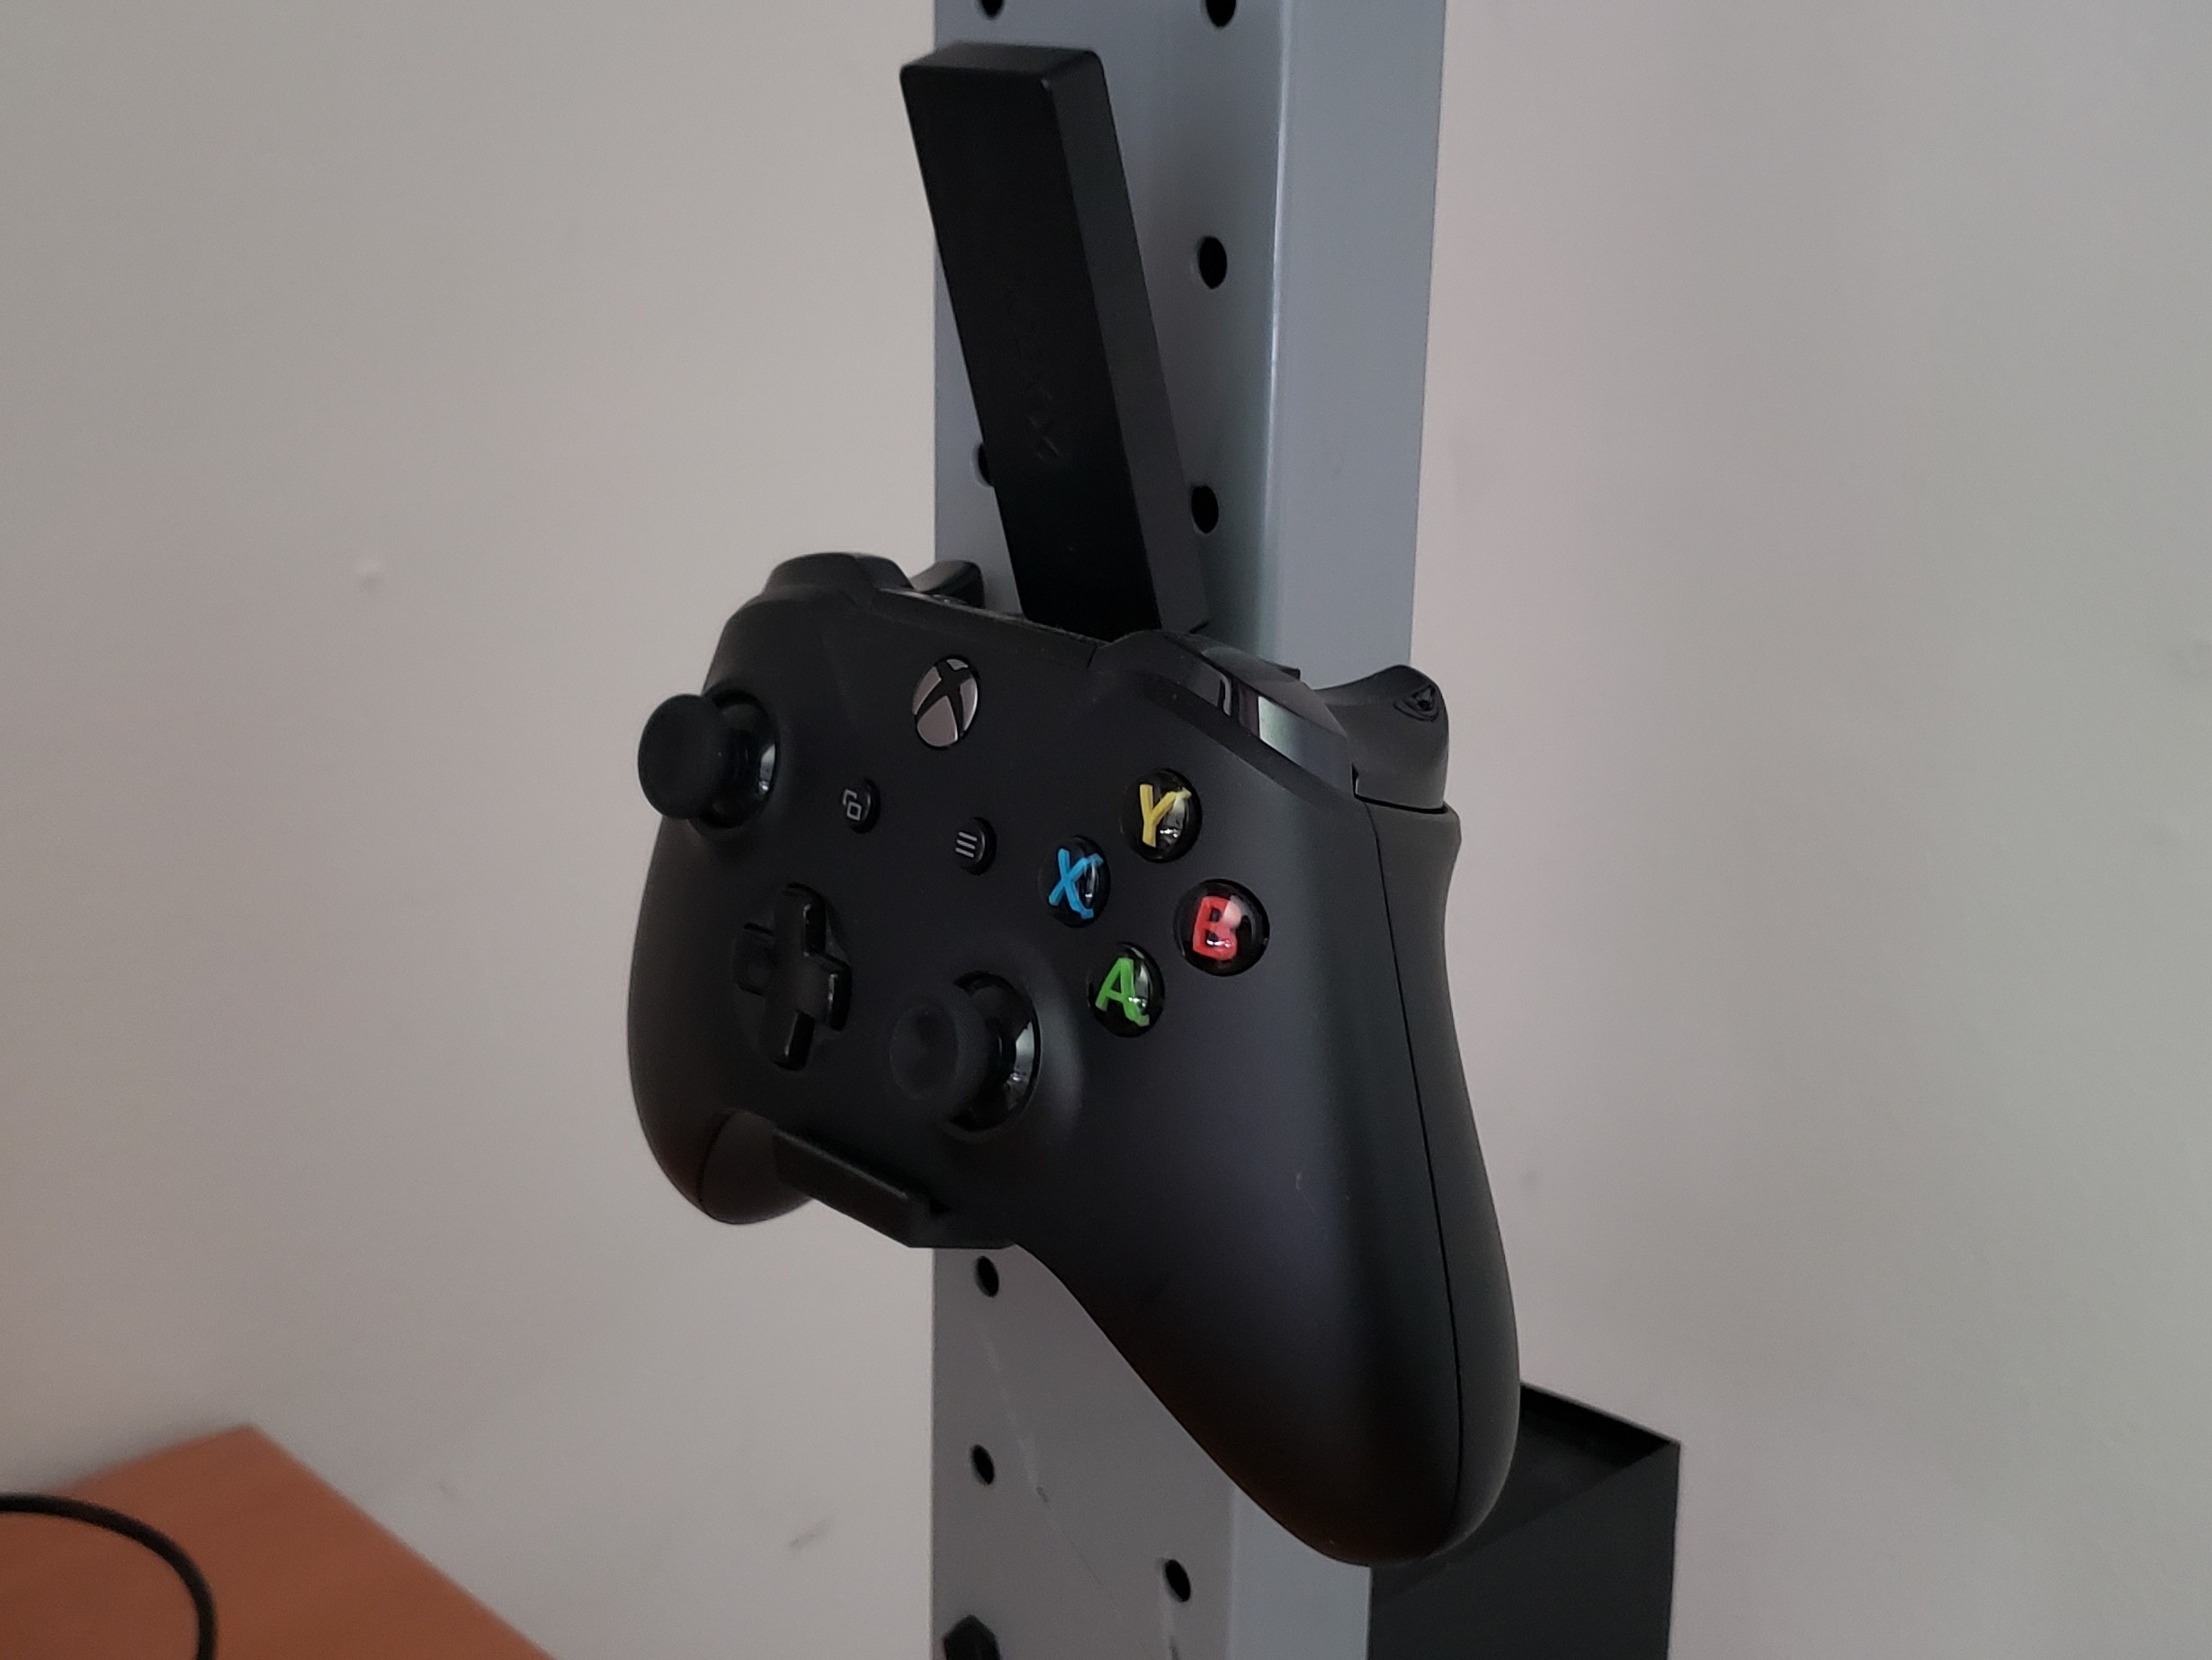 Xbox One Controller wall mount /w screw holes and USB slot for reciever